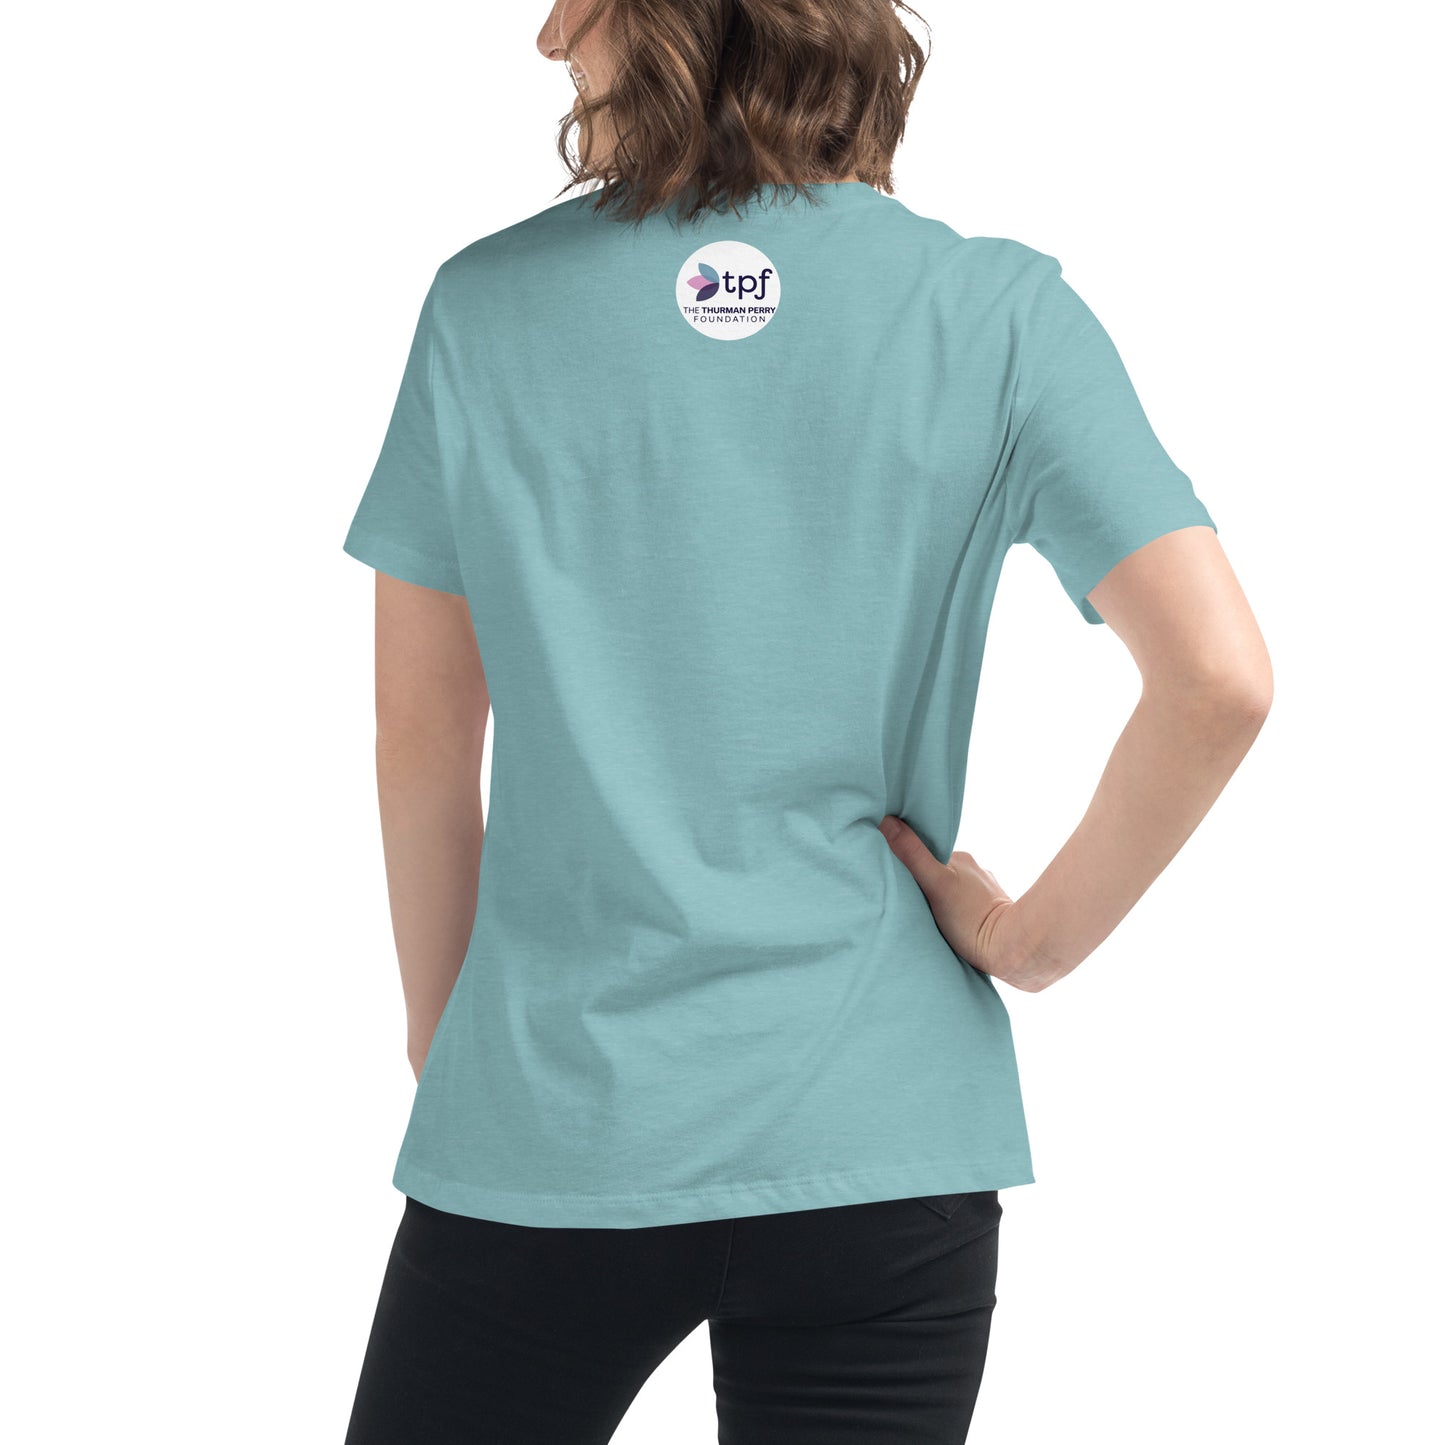 'This Shirt Fights For Women's Rights' Women's Relaxed T-Shirt